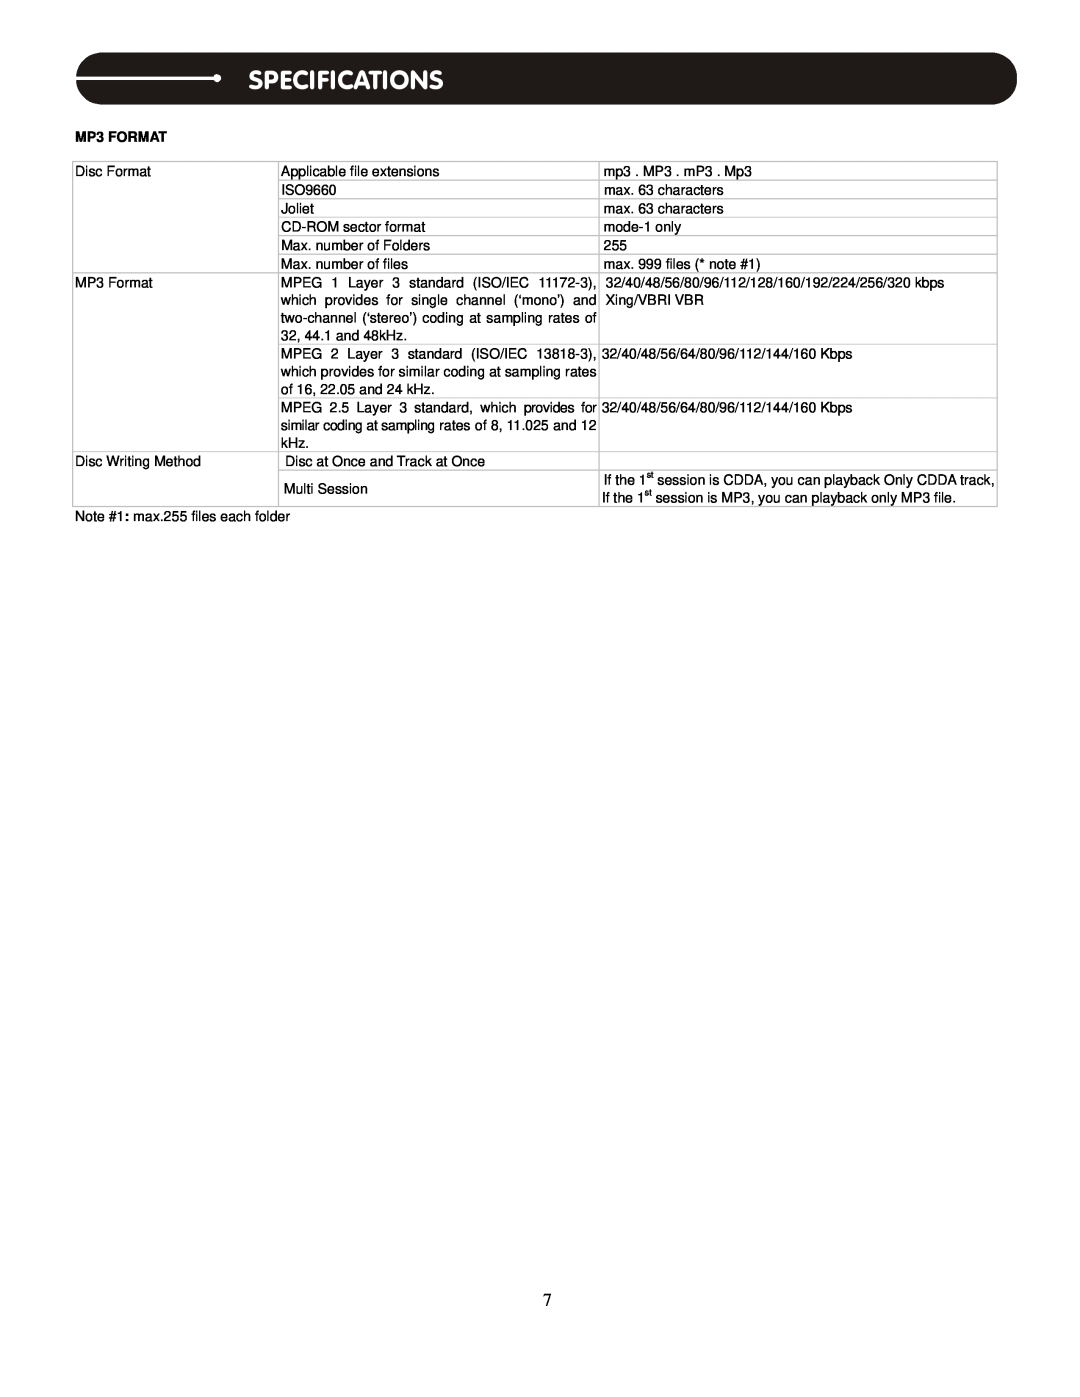 Stanton S.300 user manual Specifications, MP3 FORMAT 